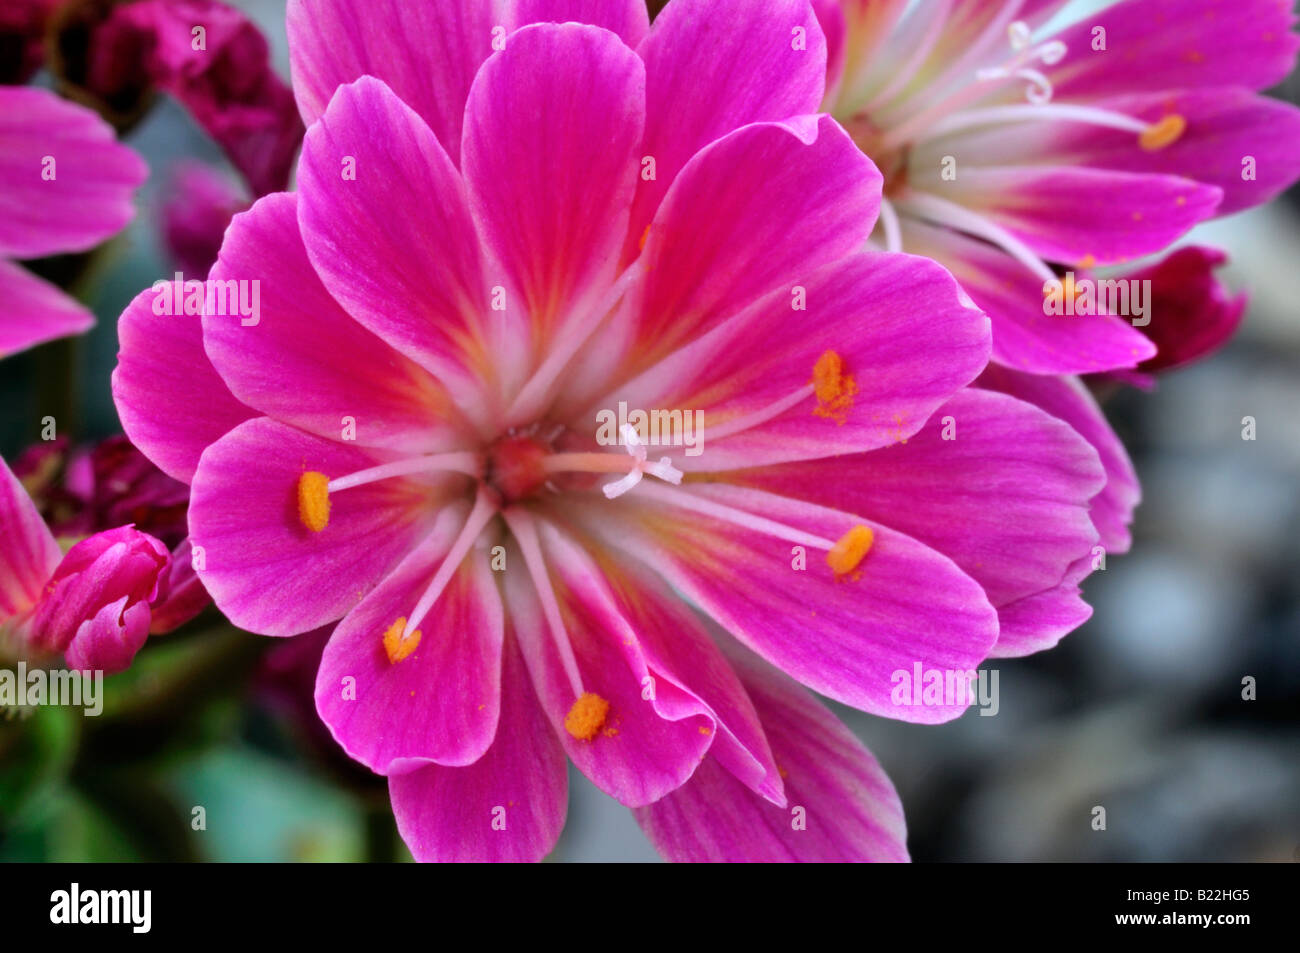 Pink Lewisia Cotyledon bitter root hybrid flowers bloom blossom closeup close up marco portrait Stock Photo